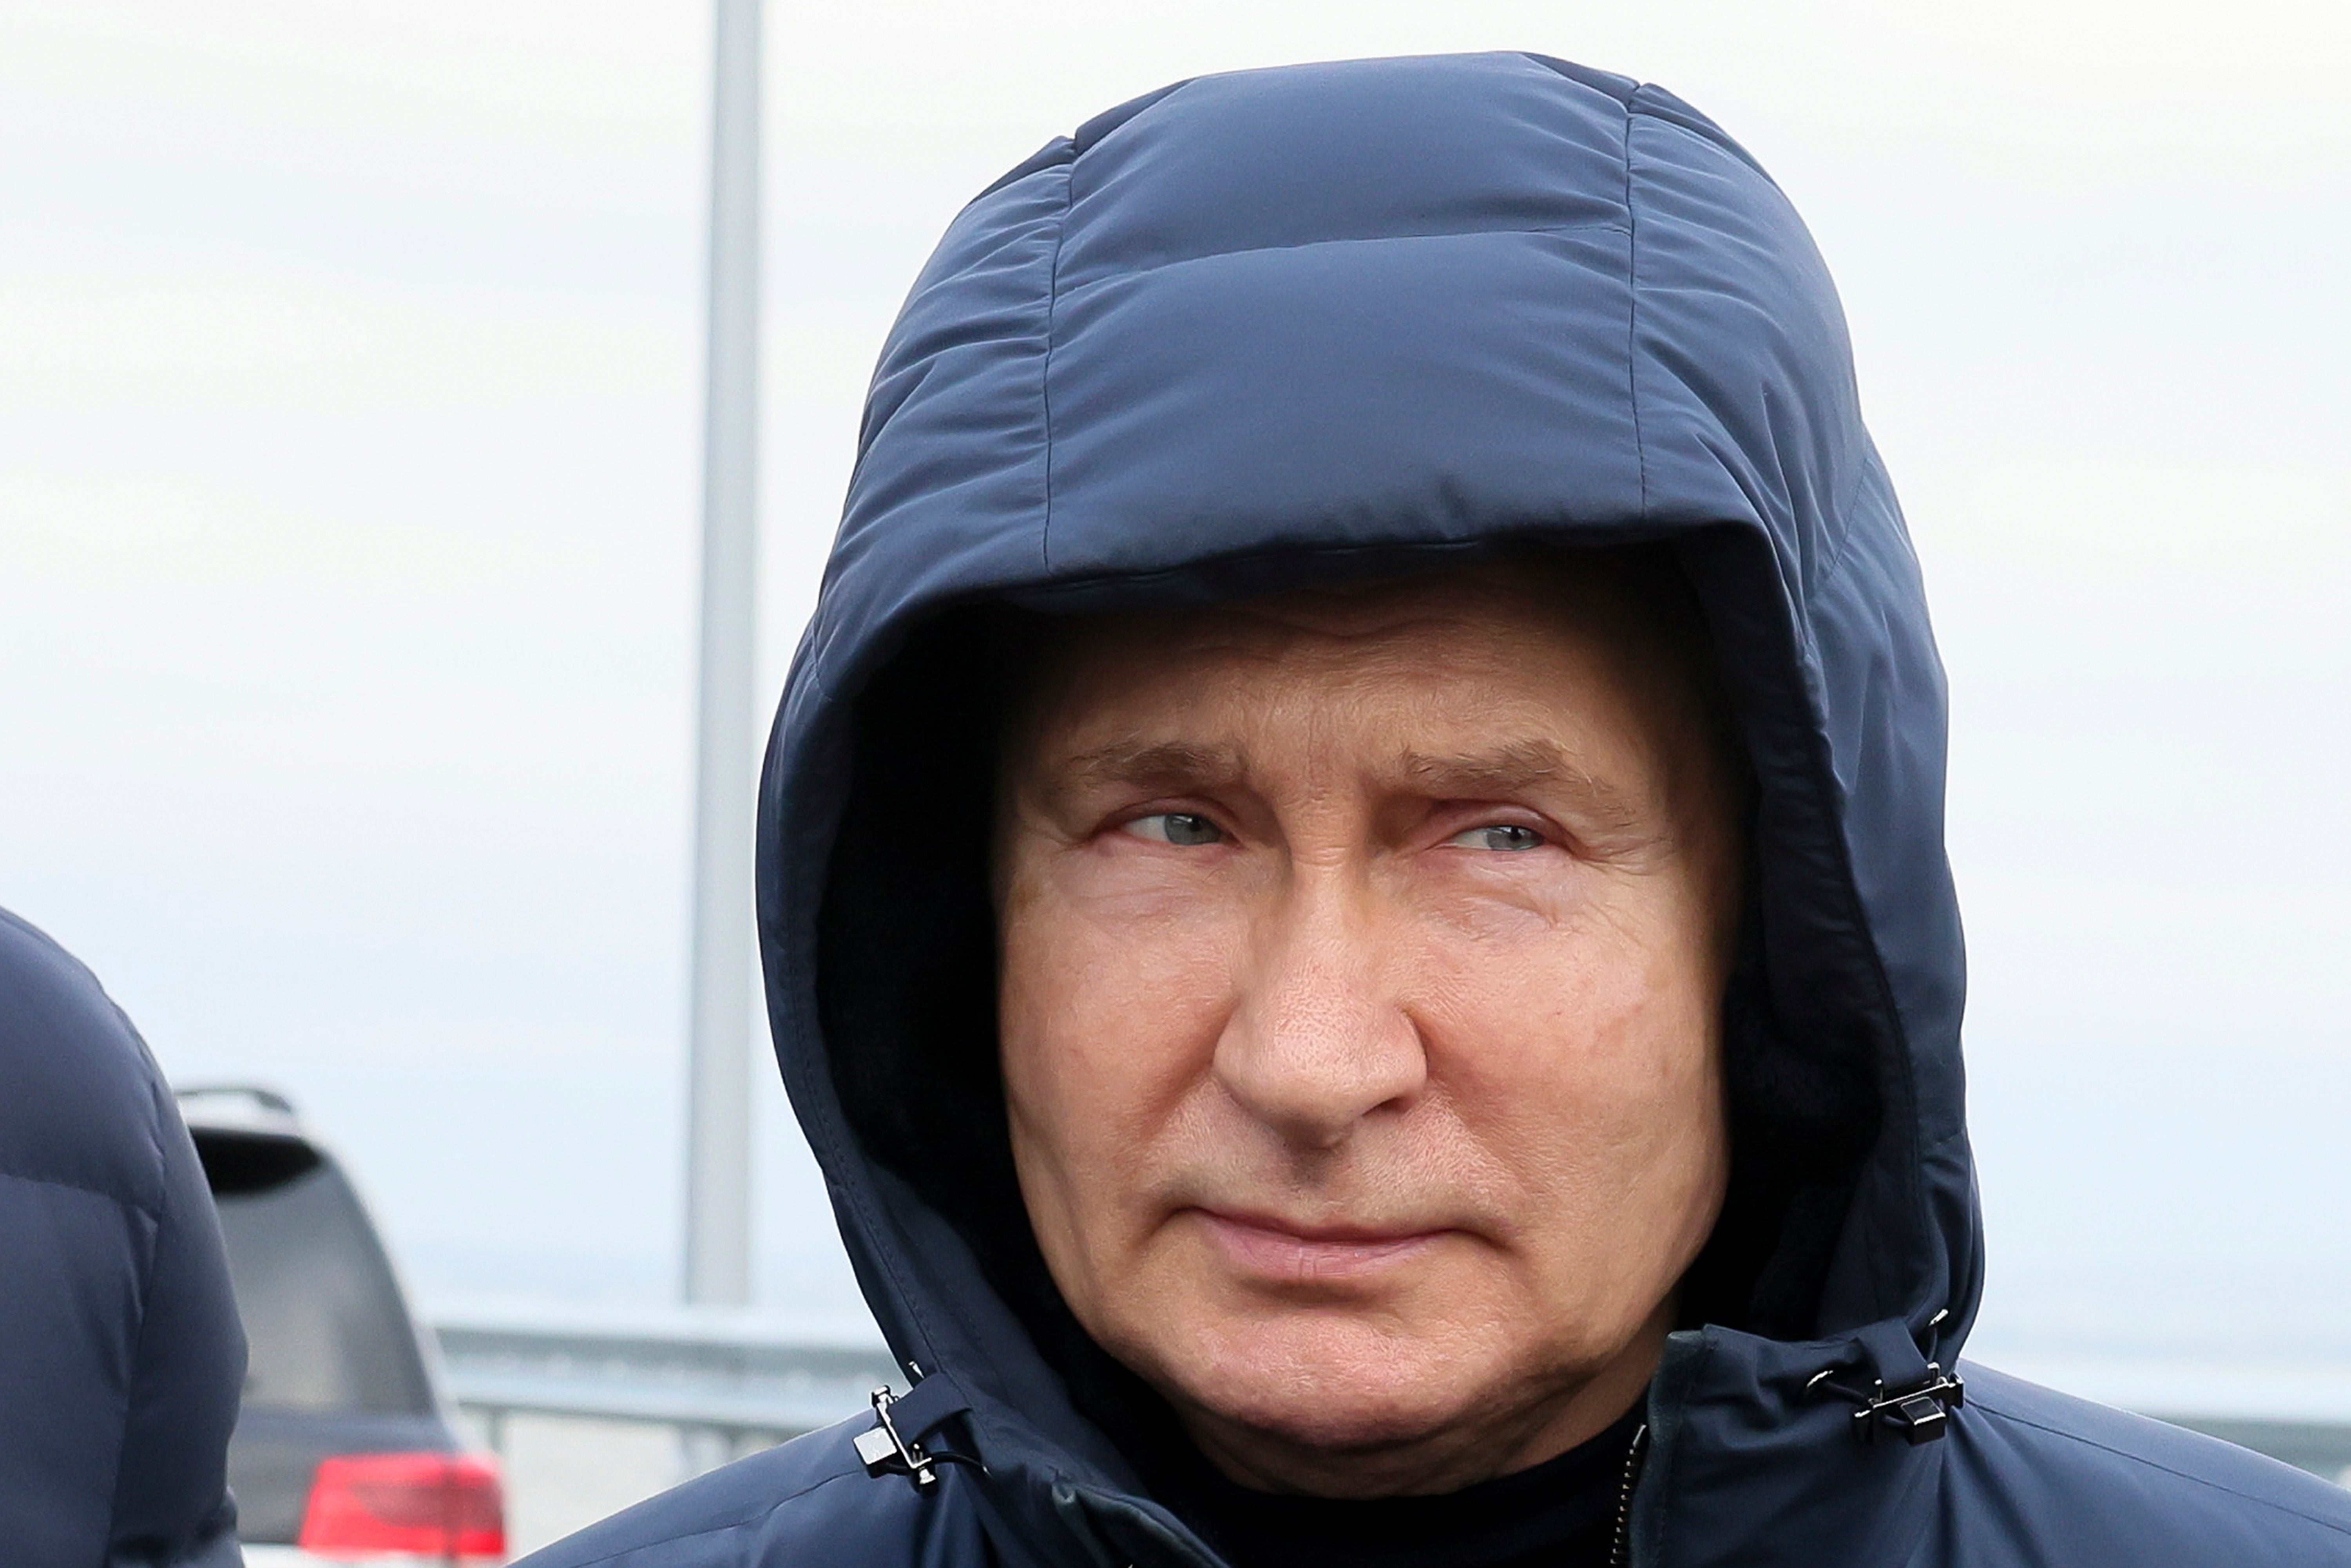 Putin’s departure – no matter what form it takes – should mean a swift conclusion to the war